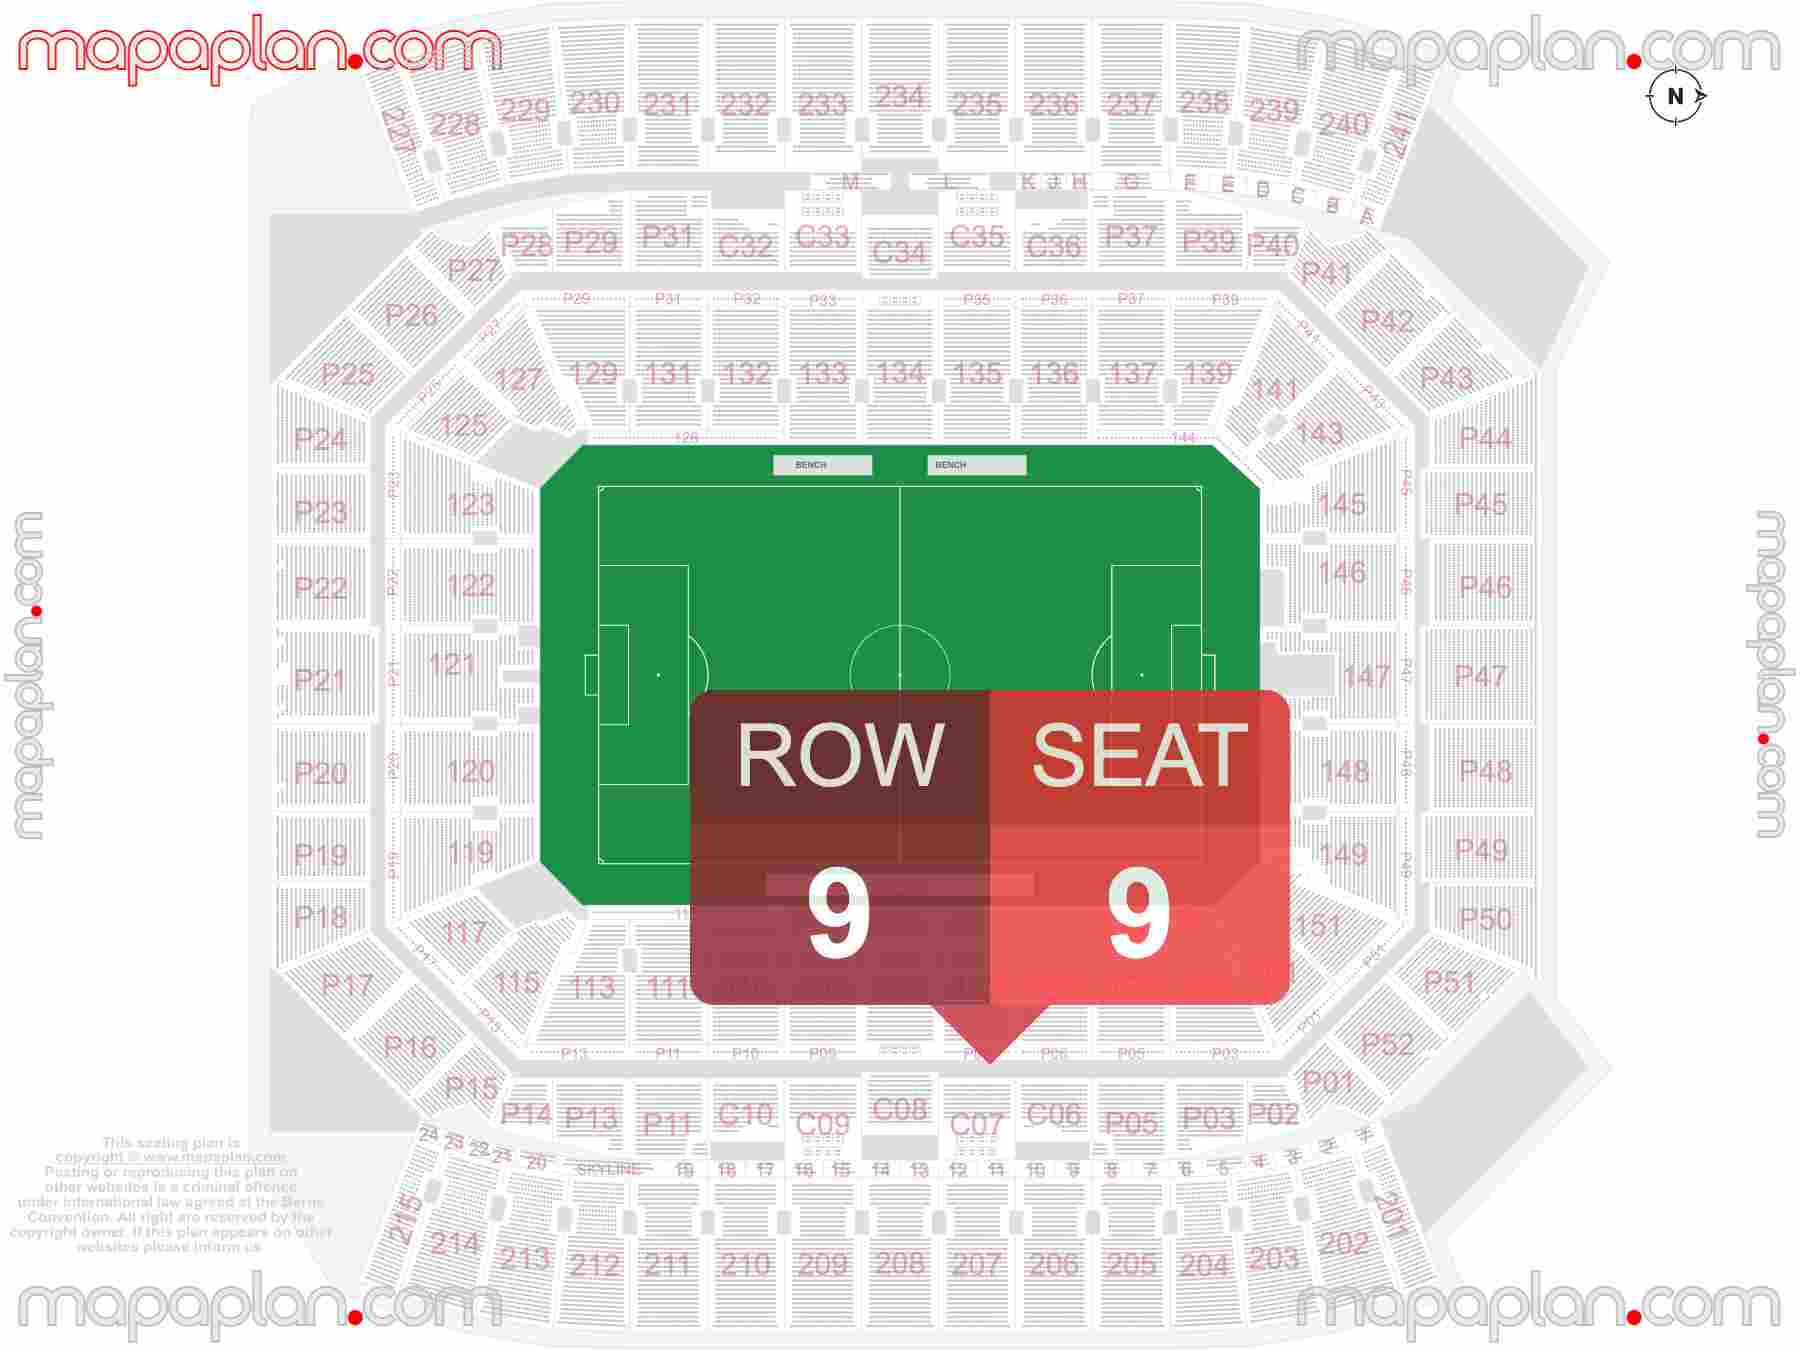 Orlando Camping World Stadium seating chart Soccer inside capacity view arrangement plan - Interactive virtual 3d best seats & rows detailed stadium image configuration layout